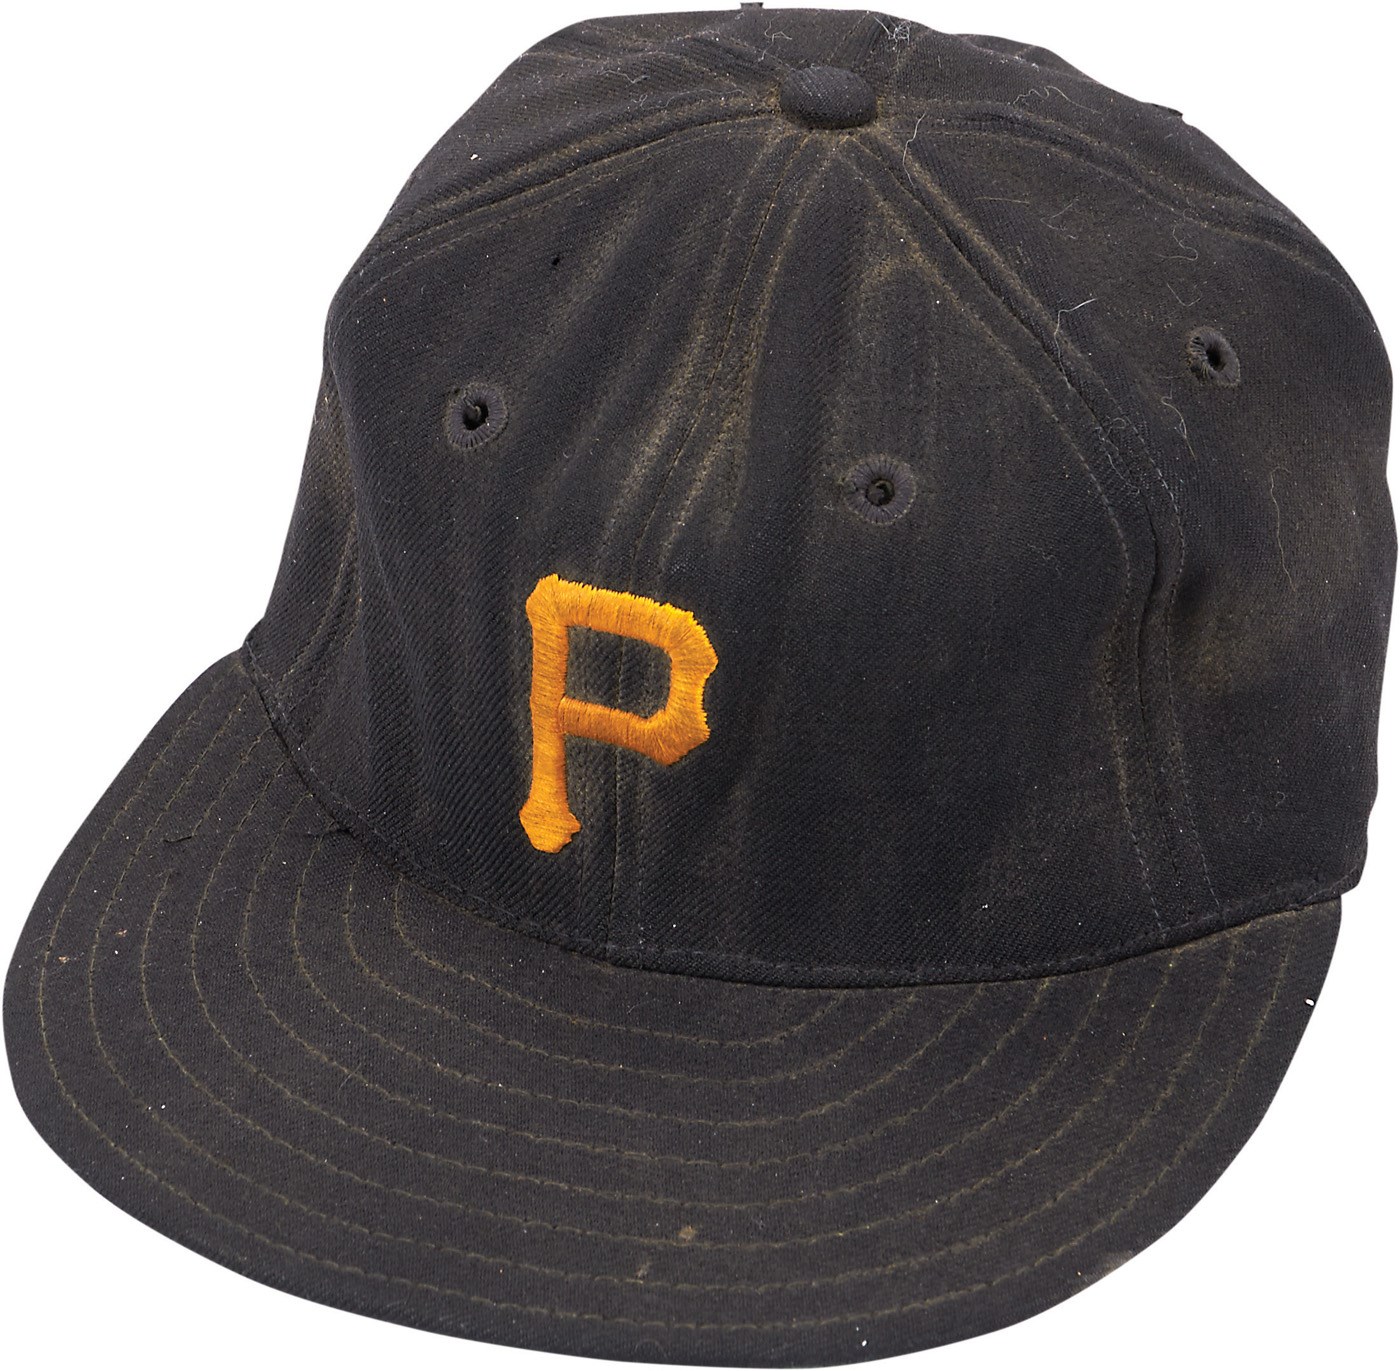 Clemente and Pittsburgh Pirates - Circa 1960 Roberto Clemente Game Worn Cap